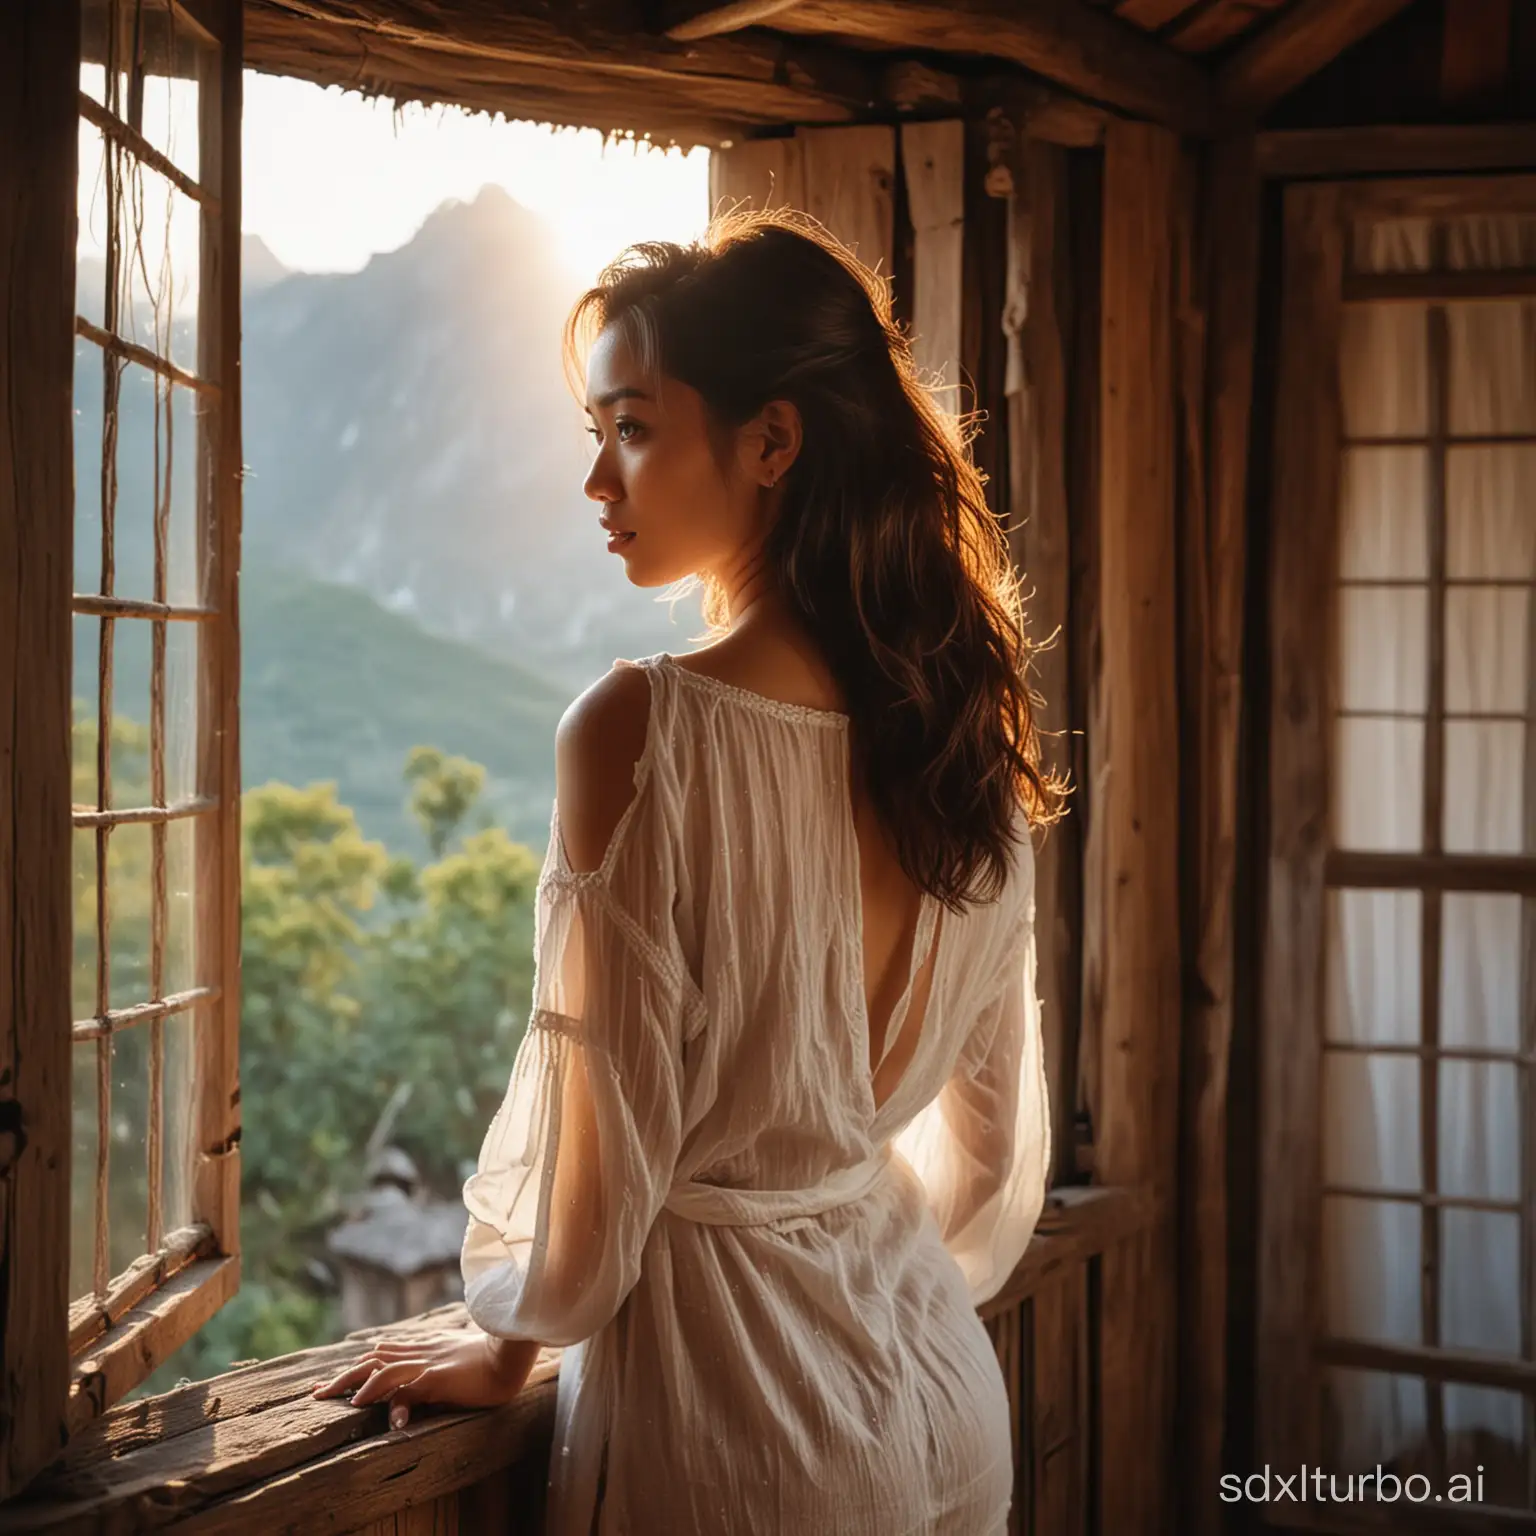 A professional portrait photo of a young Filipina woman with her back facing the viewer, taken inside a medieval wooden hut with a big window. She is facing the window, revealing a majestic view of a mountain range with morning mist and a mesmerizing sunrise. She is wearing a oversized, transparent and torn cotton shirt. The setting is medieval, with messy morning hair, candle lights, and soft lighting. The photo is soft, sexy, and revealing with film grain and bokeh. Her thick, naked legs are partially showing her ass. The photo is taken from behind her with soft lighting.